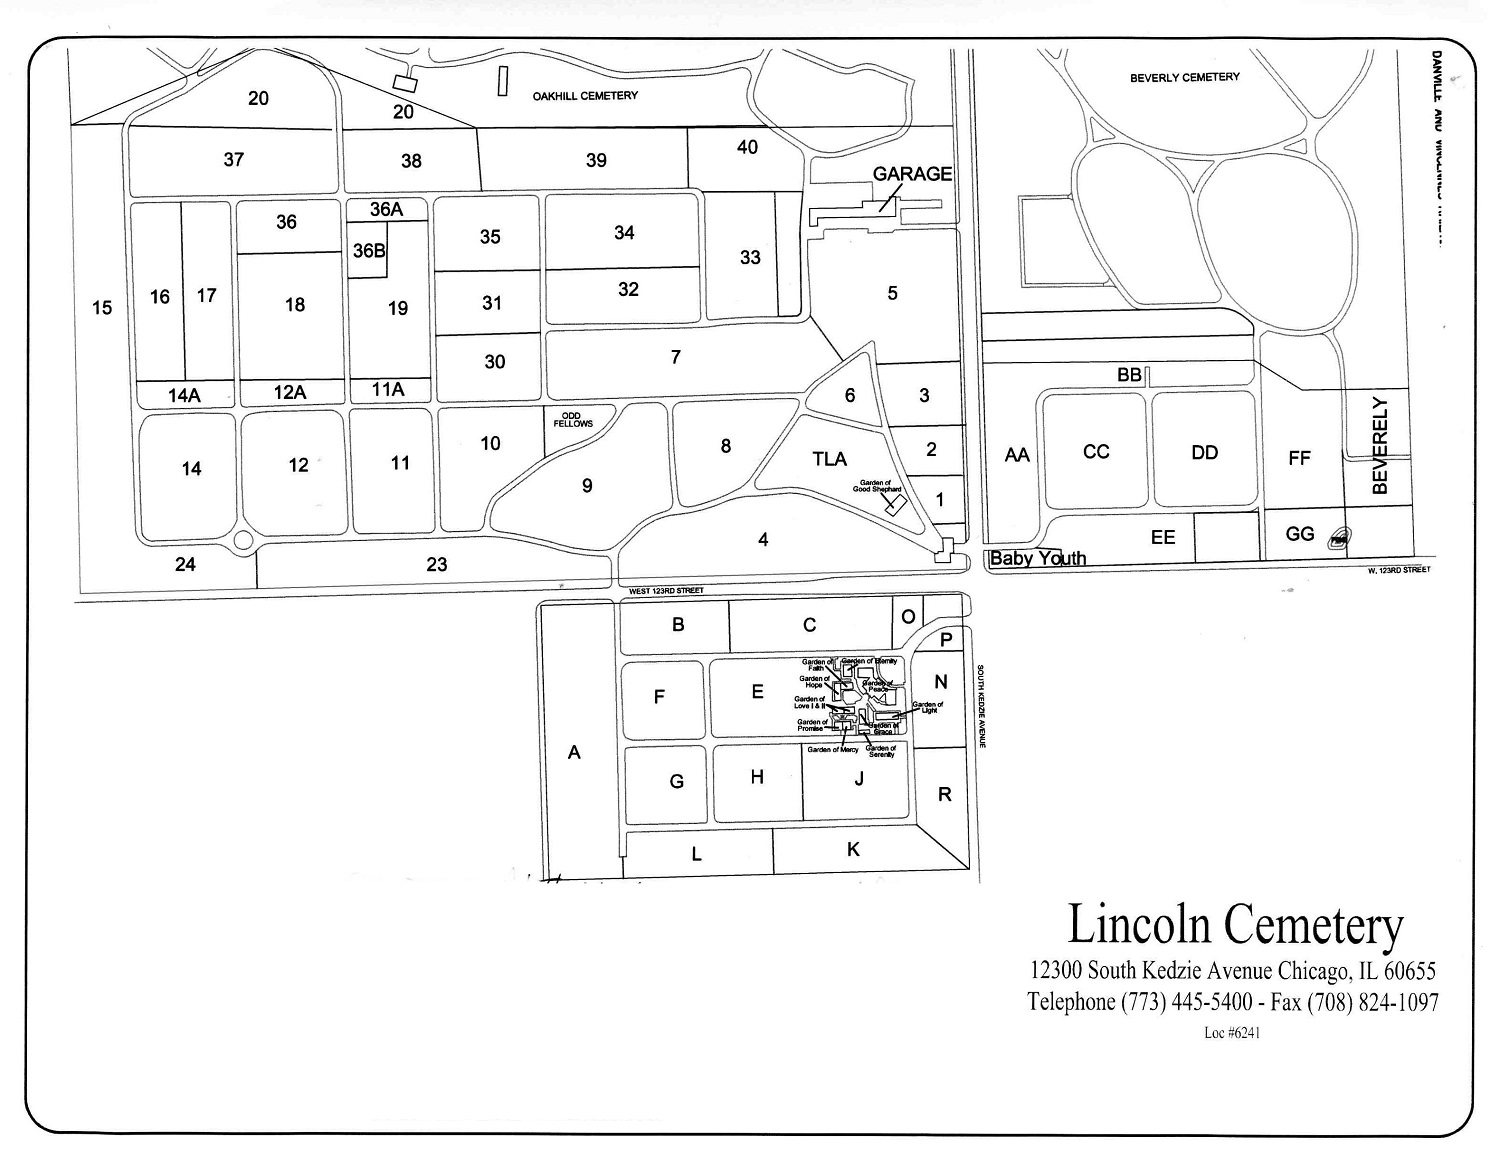 Cemetery map of Lincoln Cemetery in Blue Island, Illinois.